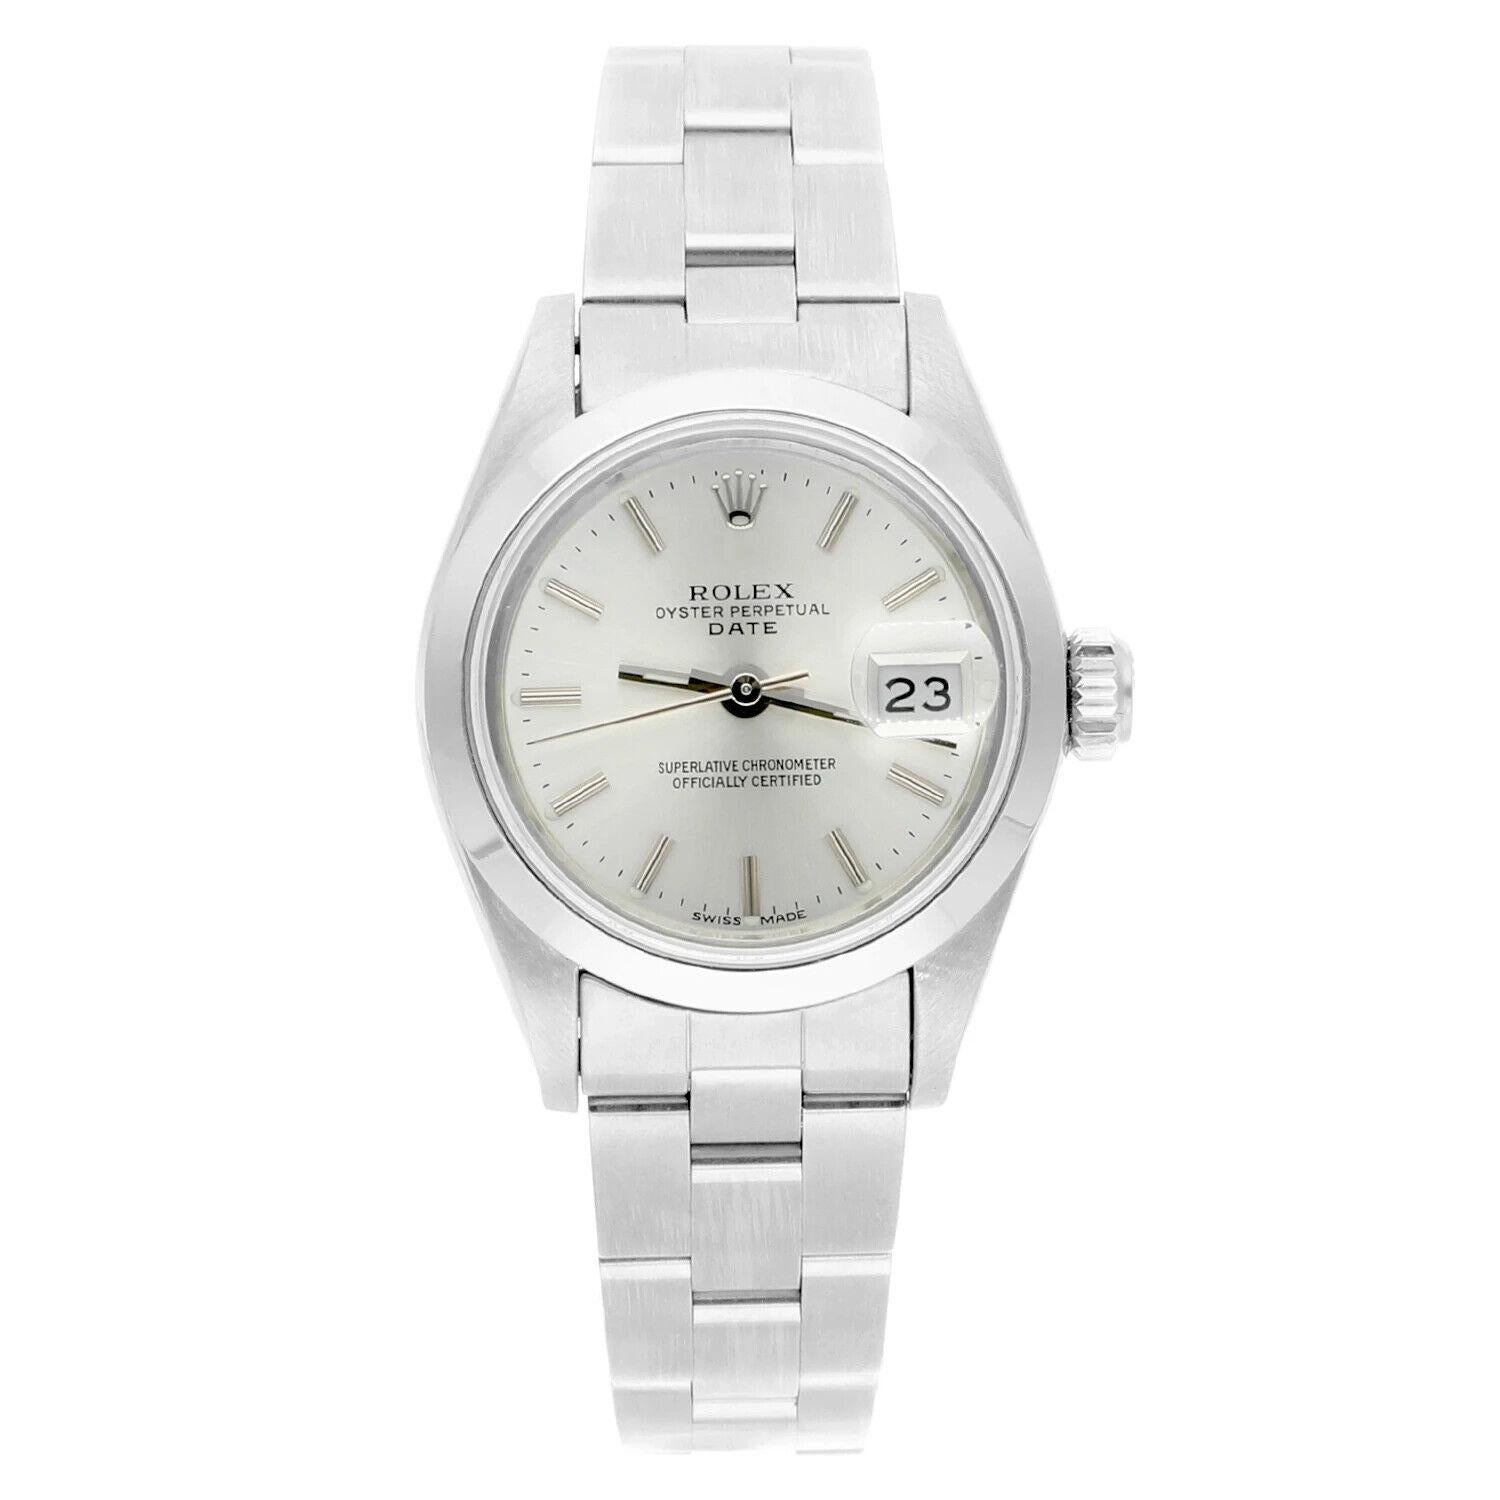 Rolex Date Silver Dial Oyster Bracelet Stainless Steel Ladies Watch 69160, Circa 1984, 8 million series.
This watch has been professionally polished, serviced and is in excellent overall condition. There are absolutely no visible scratches or